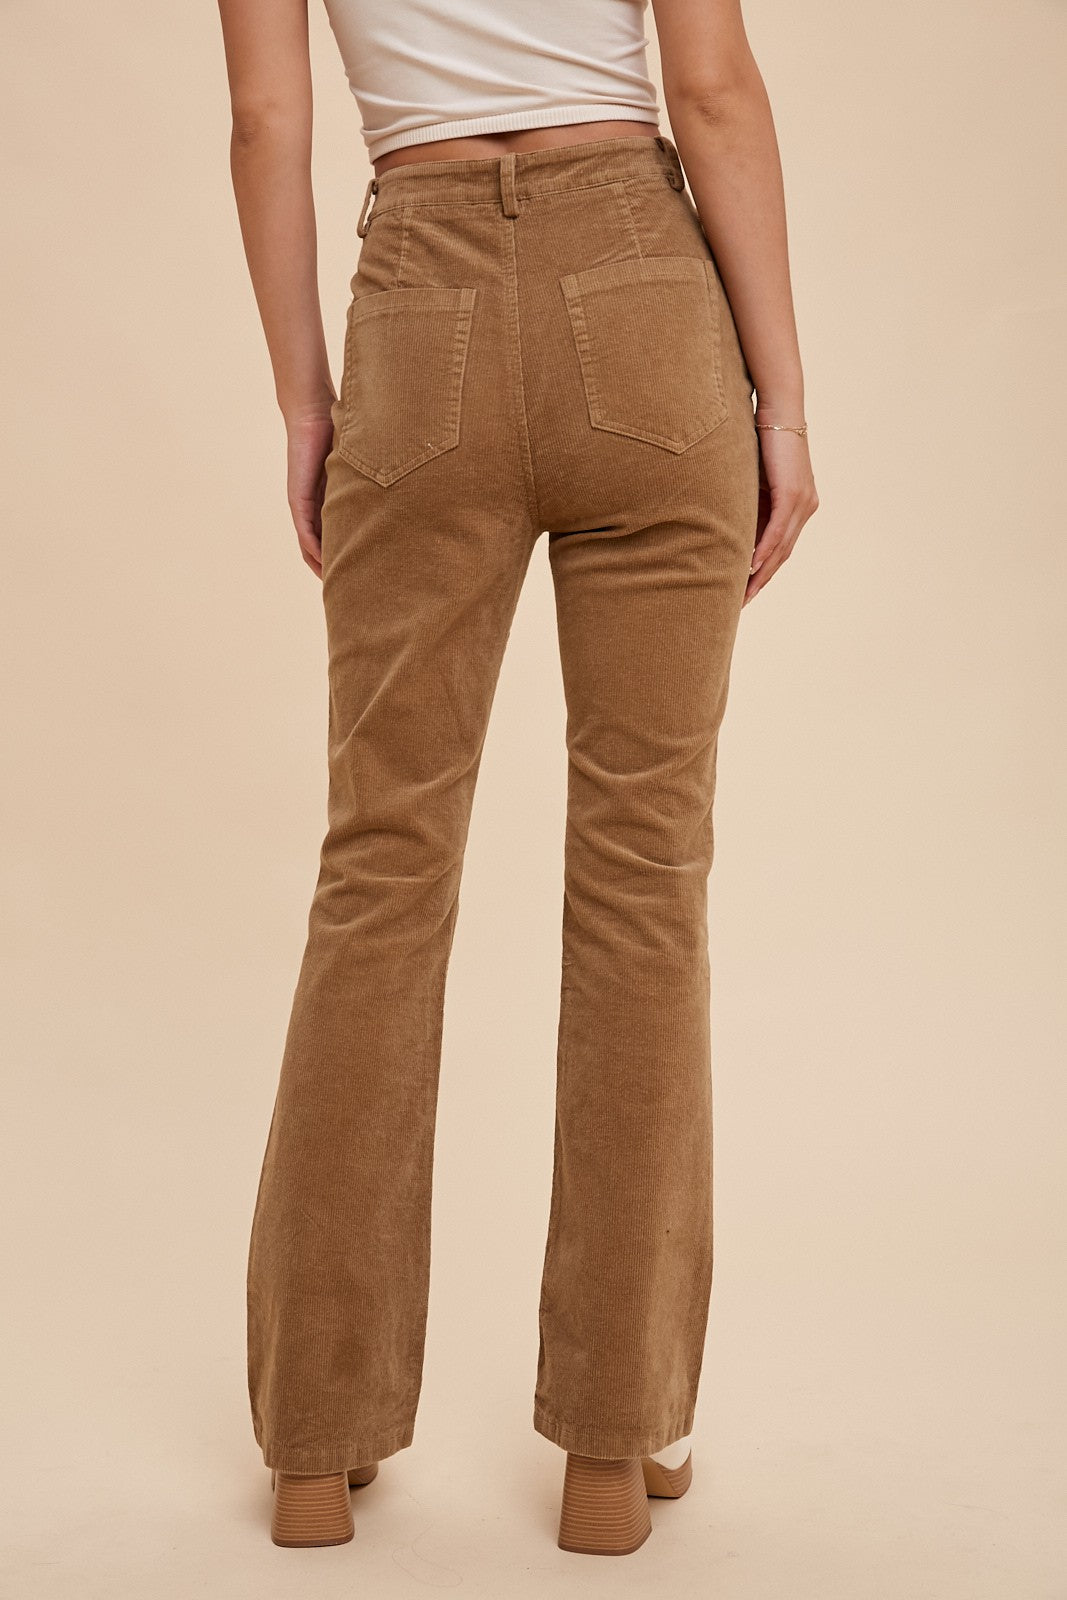 Add Some Flare Corduroy Pants